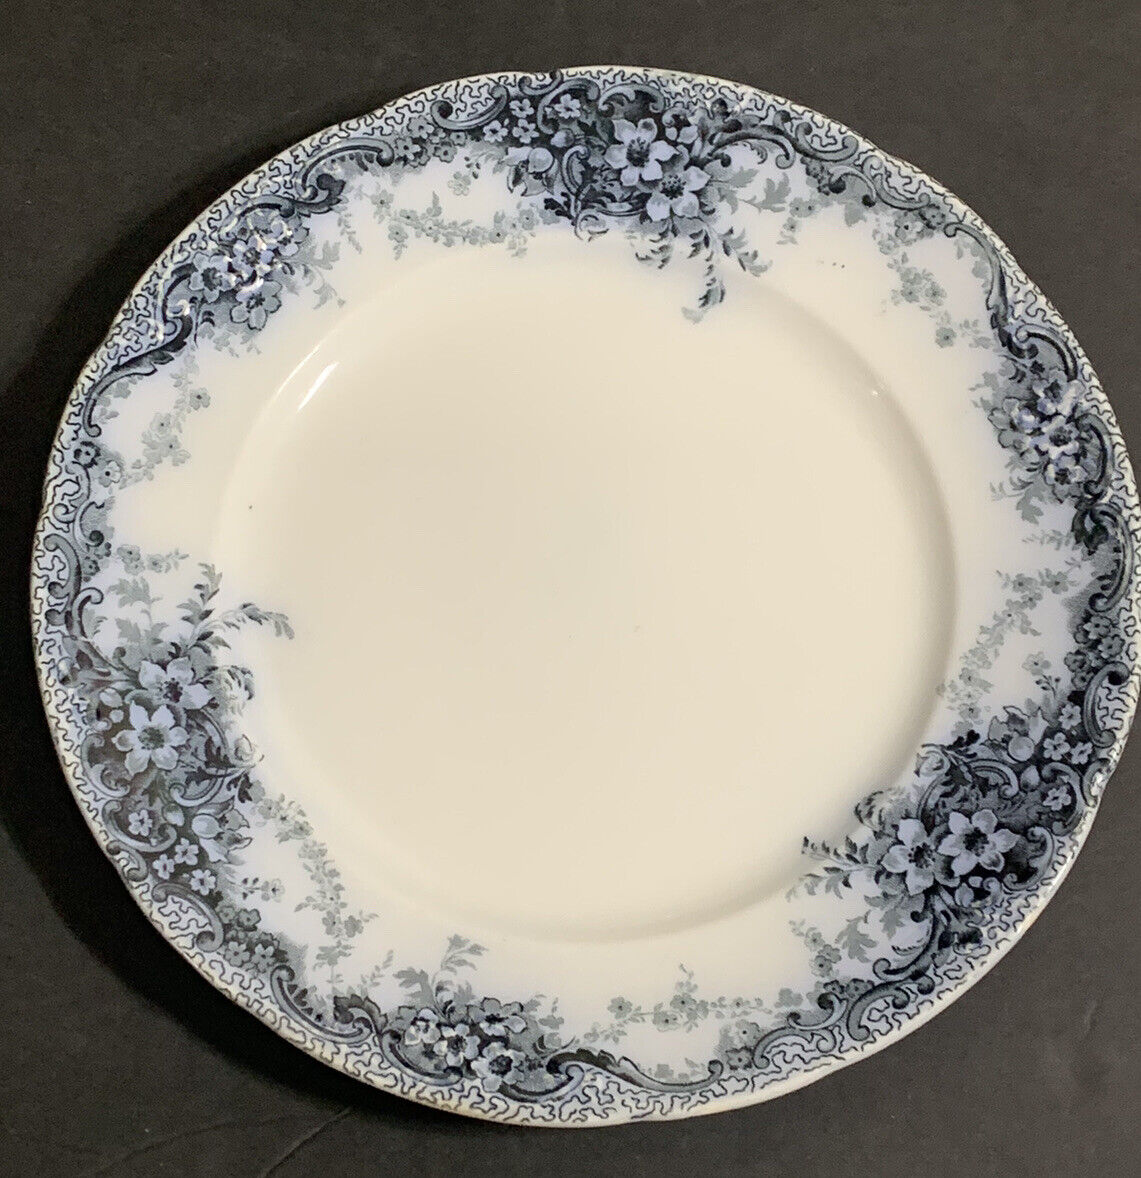 EX RARE Antique Alfred Meakin 9” FLOW BLUE MEDWAY Floral Dinnerware Lunch PLATE